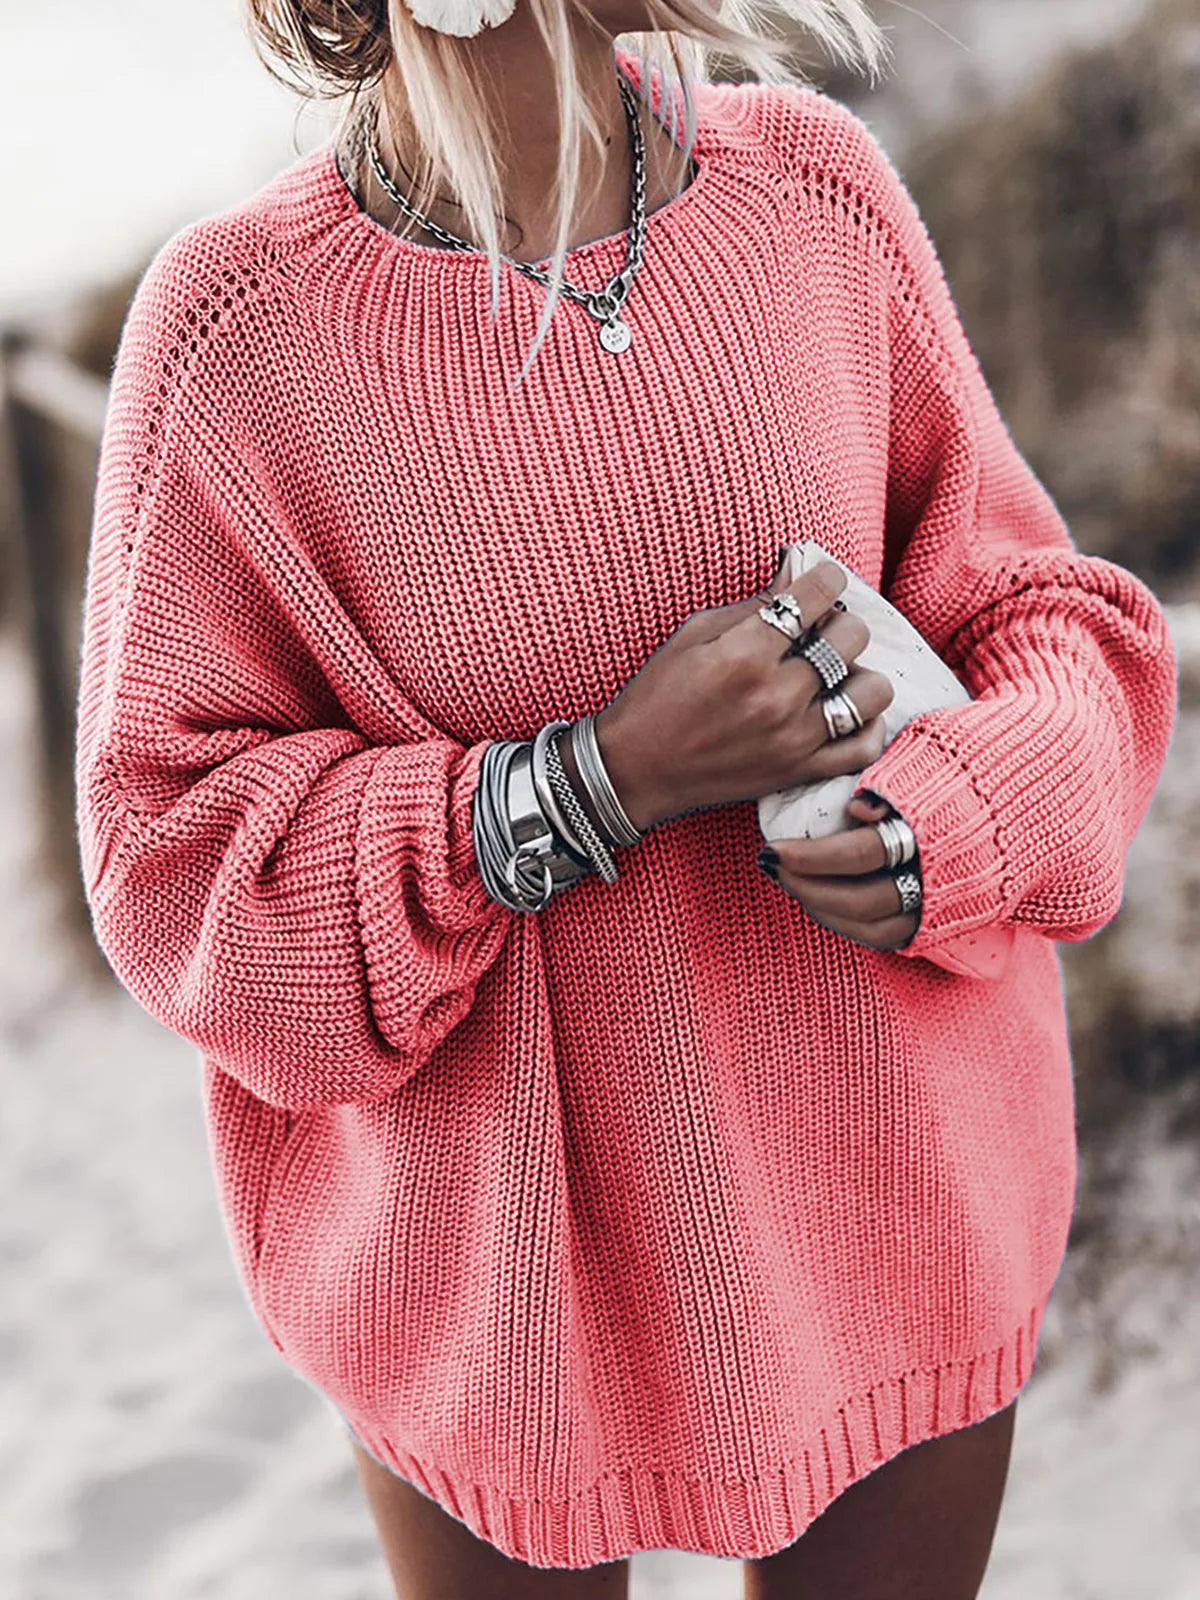 A person wearing a Maramalive™ oversized sweater fall 2022 sweater for women Solid pink blue khaki purple pullover Long sleeve loose knitted sweater, multiple rings, and bracelets is standing outdoors holding a piece of fabric, showcasing stylish women's casual clothing perfect for autumn/winter fashion.